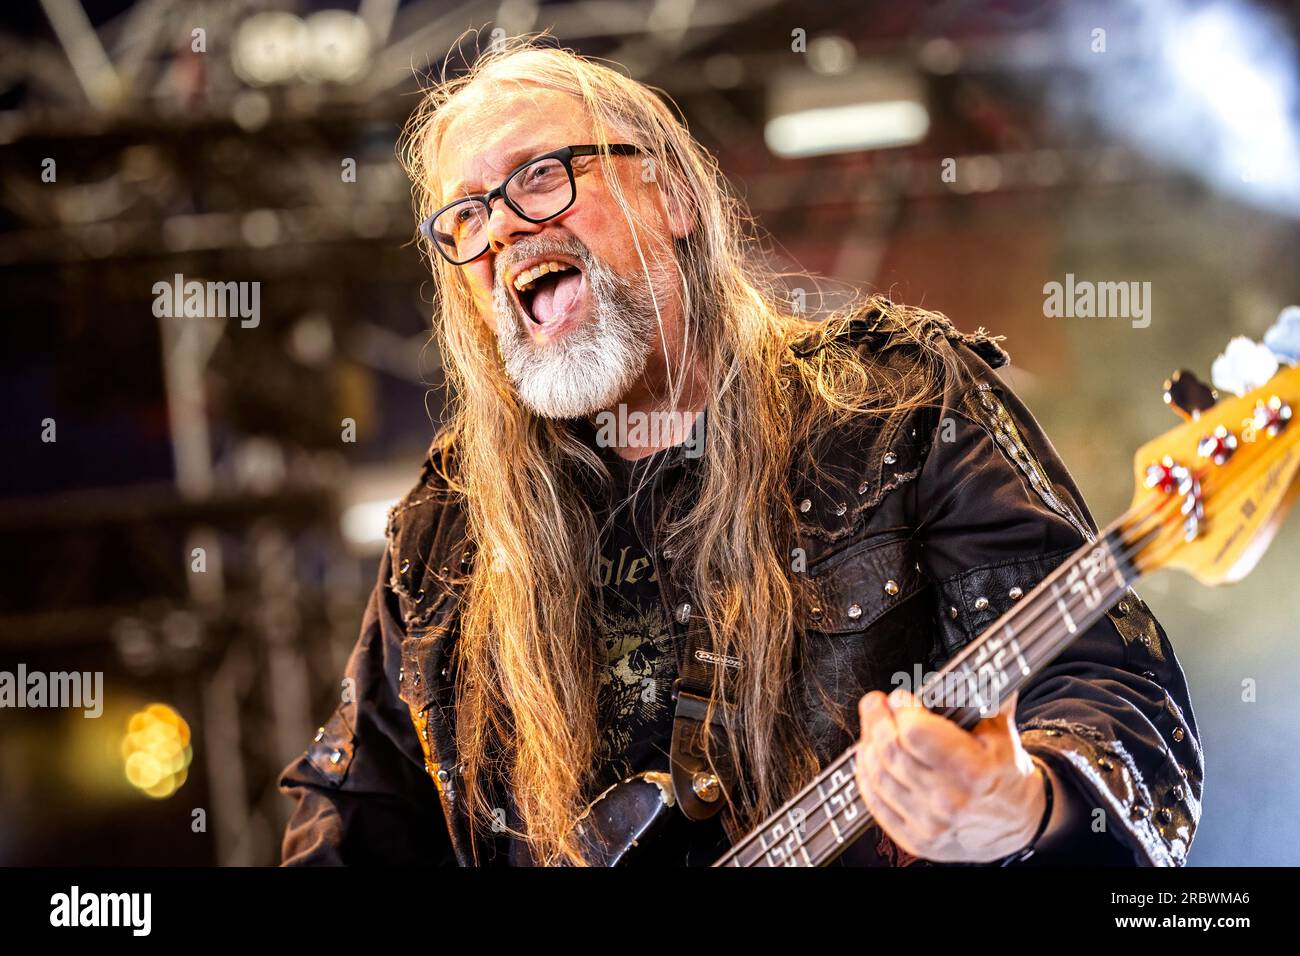 Oslo, Norway. 24th, June 2023. The Swedish doom metal band Candlemass performs a live concert during the Norwegian music festival Tons of Rock 2023 in Oslo. Here bass player Leif Edling is seen live on stage. (Photo credit: Gonzales Photo - Terje Dokken). Stock Photo